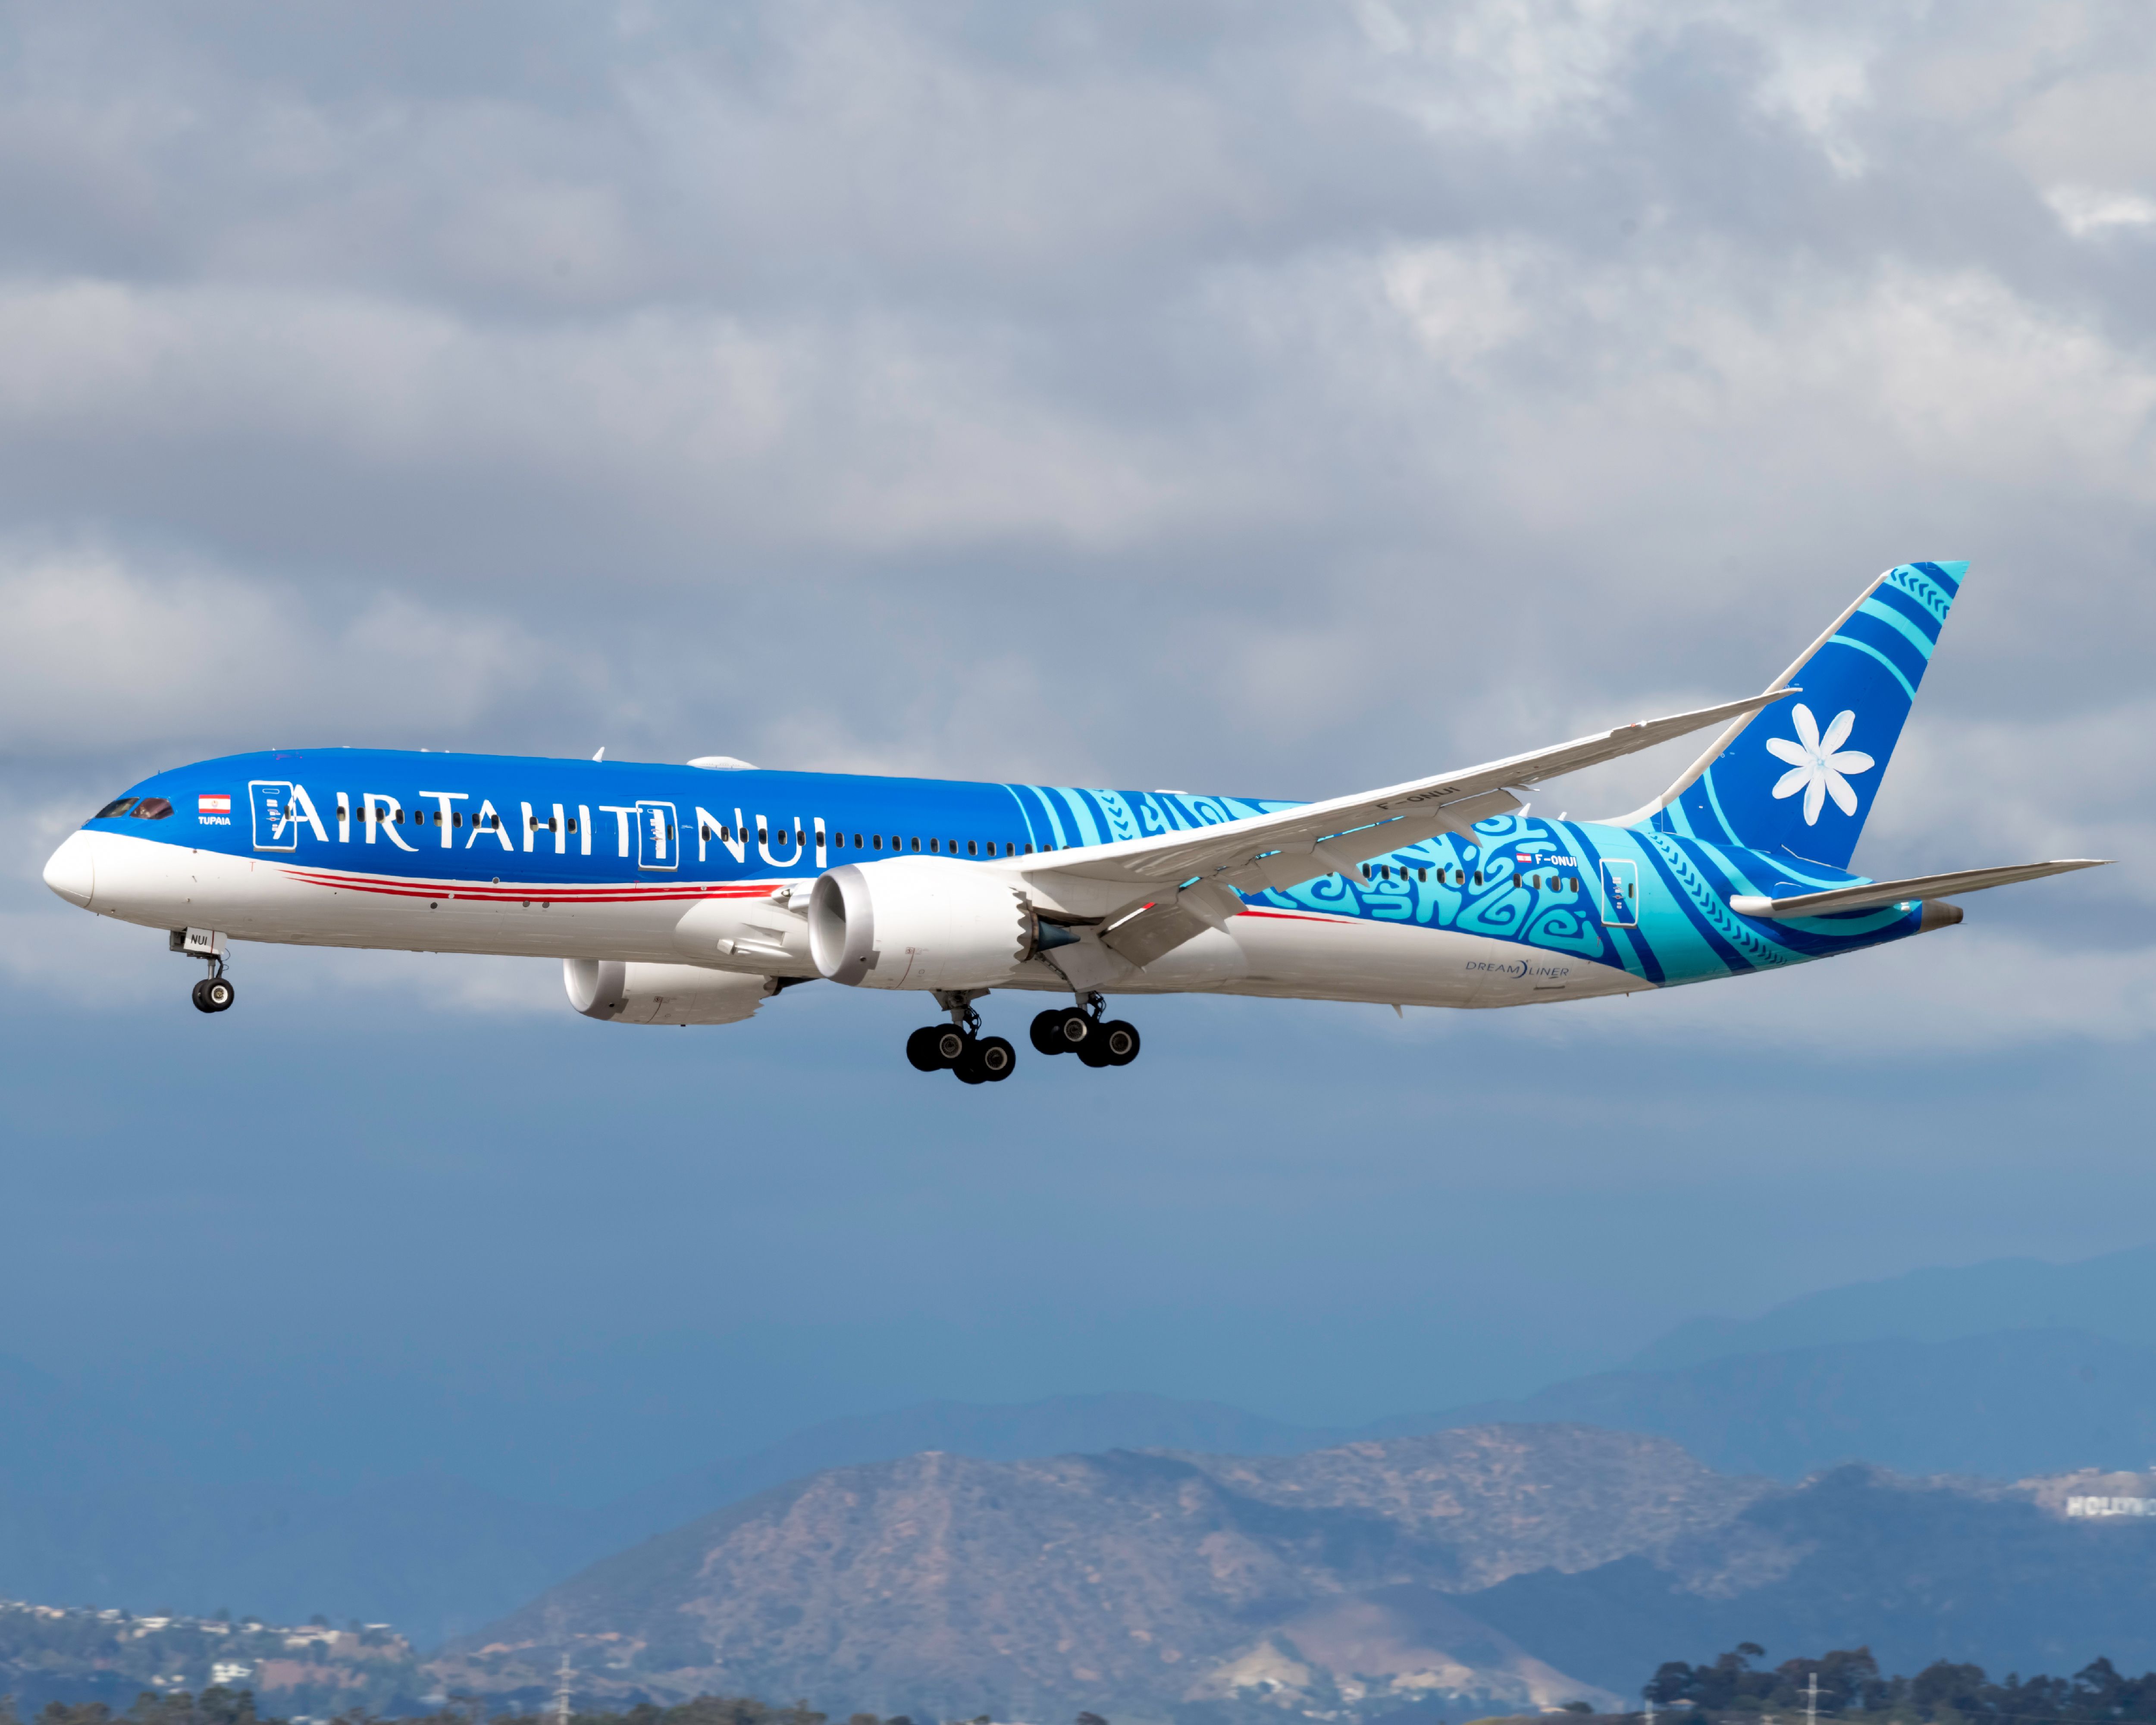 An Air Tahiti Nui Boeing 787-9 Dreamliner in flight close to the ground.